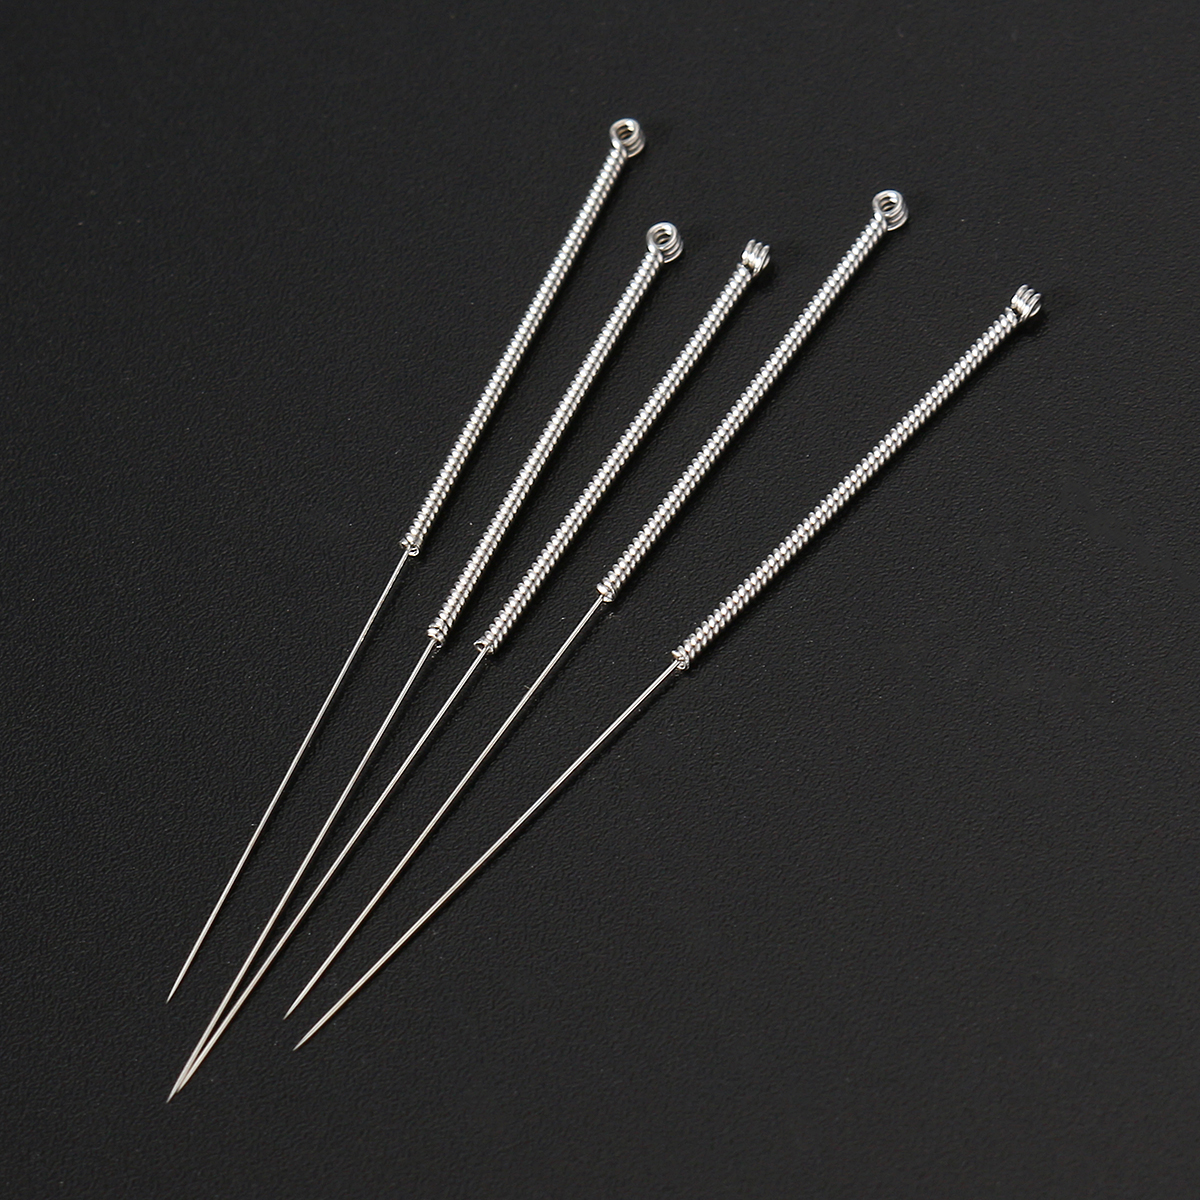 5Pcs Special Tattoo Needle Laser Freckle Dark Spot Removal Skin Moles Removed Needles